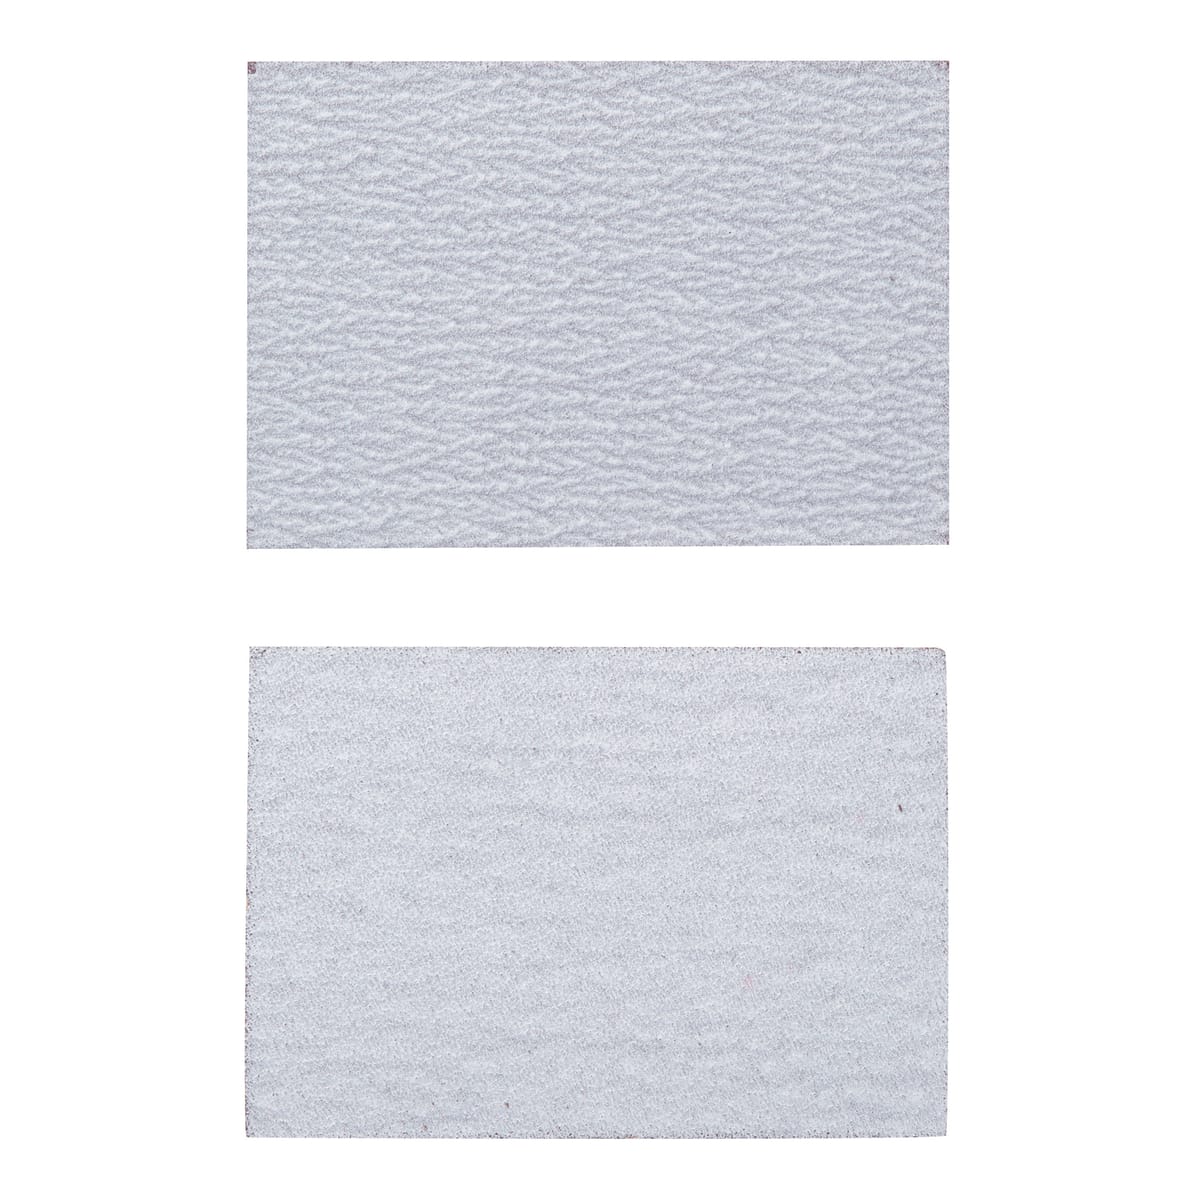 DEXTER SANDPAPER PAD 100X70MM + 3 SHEETS FOR WALL GRIT 80, 120